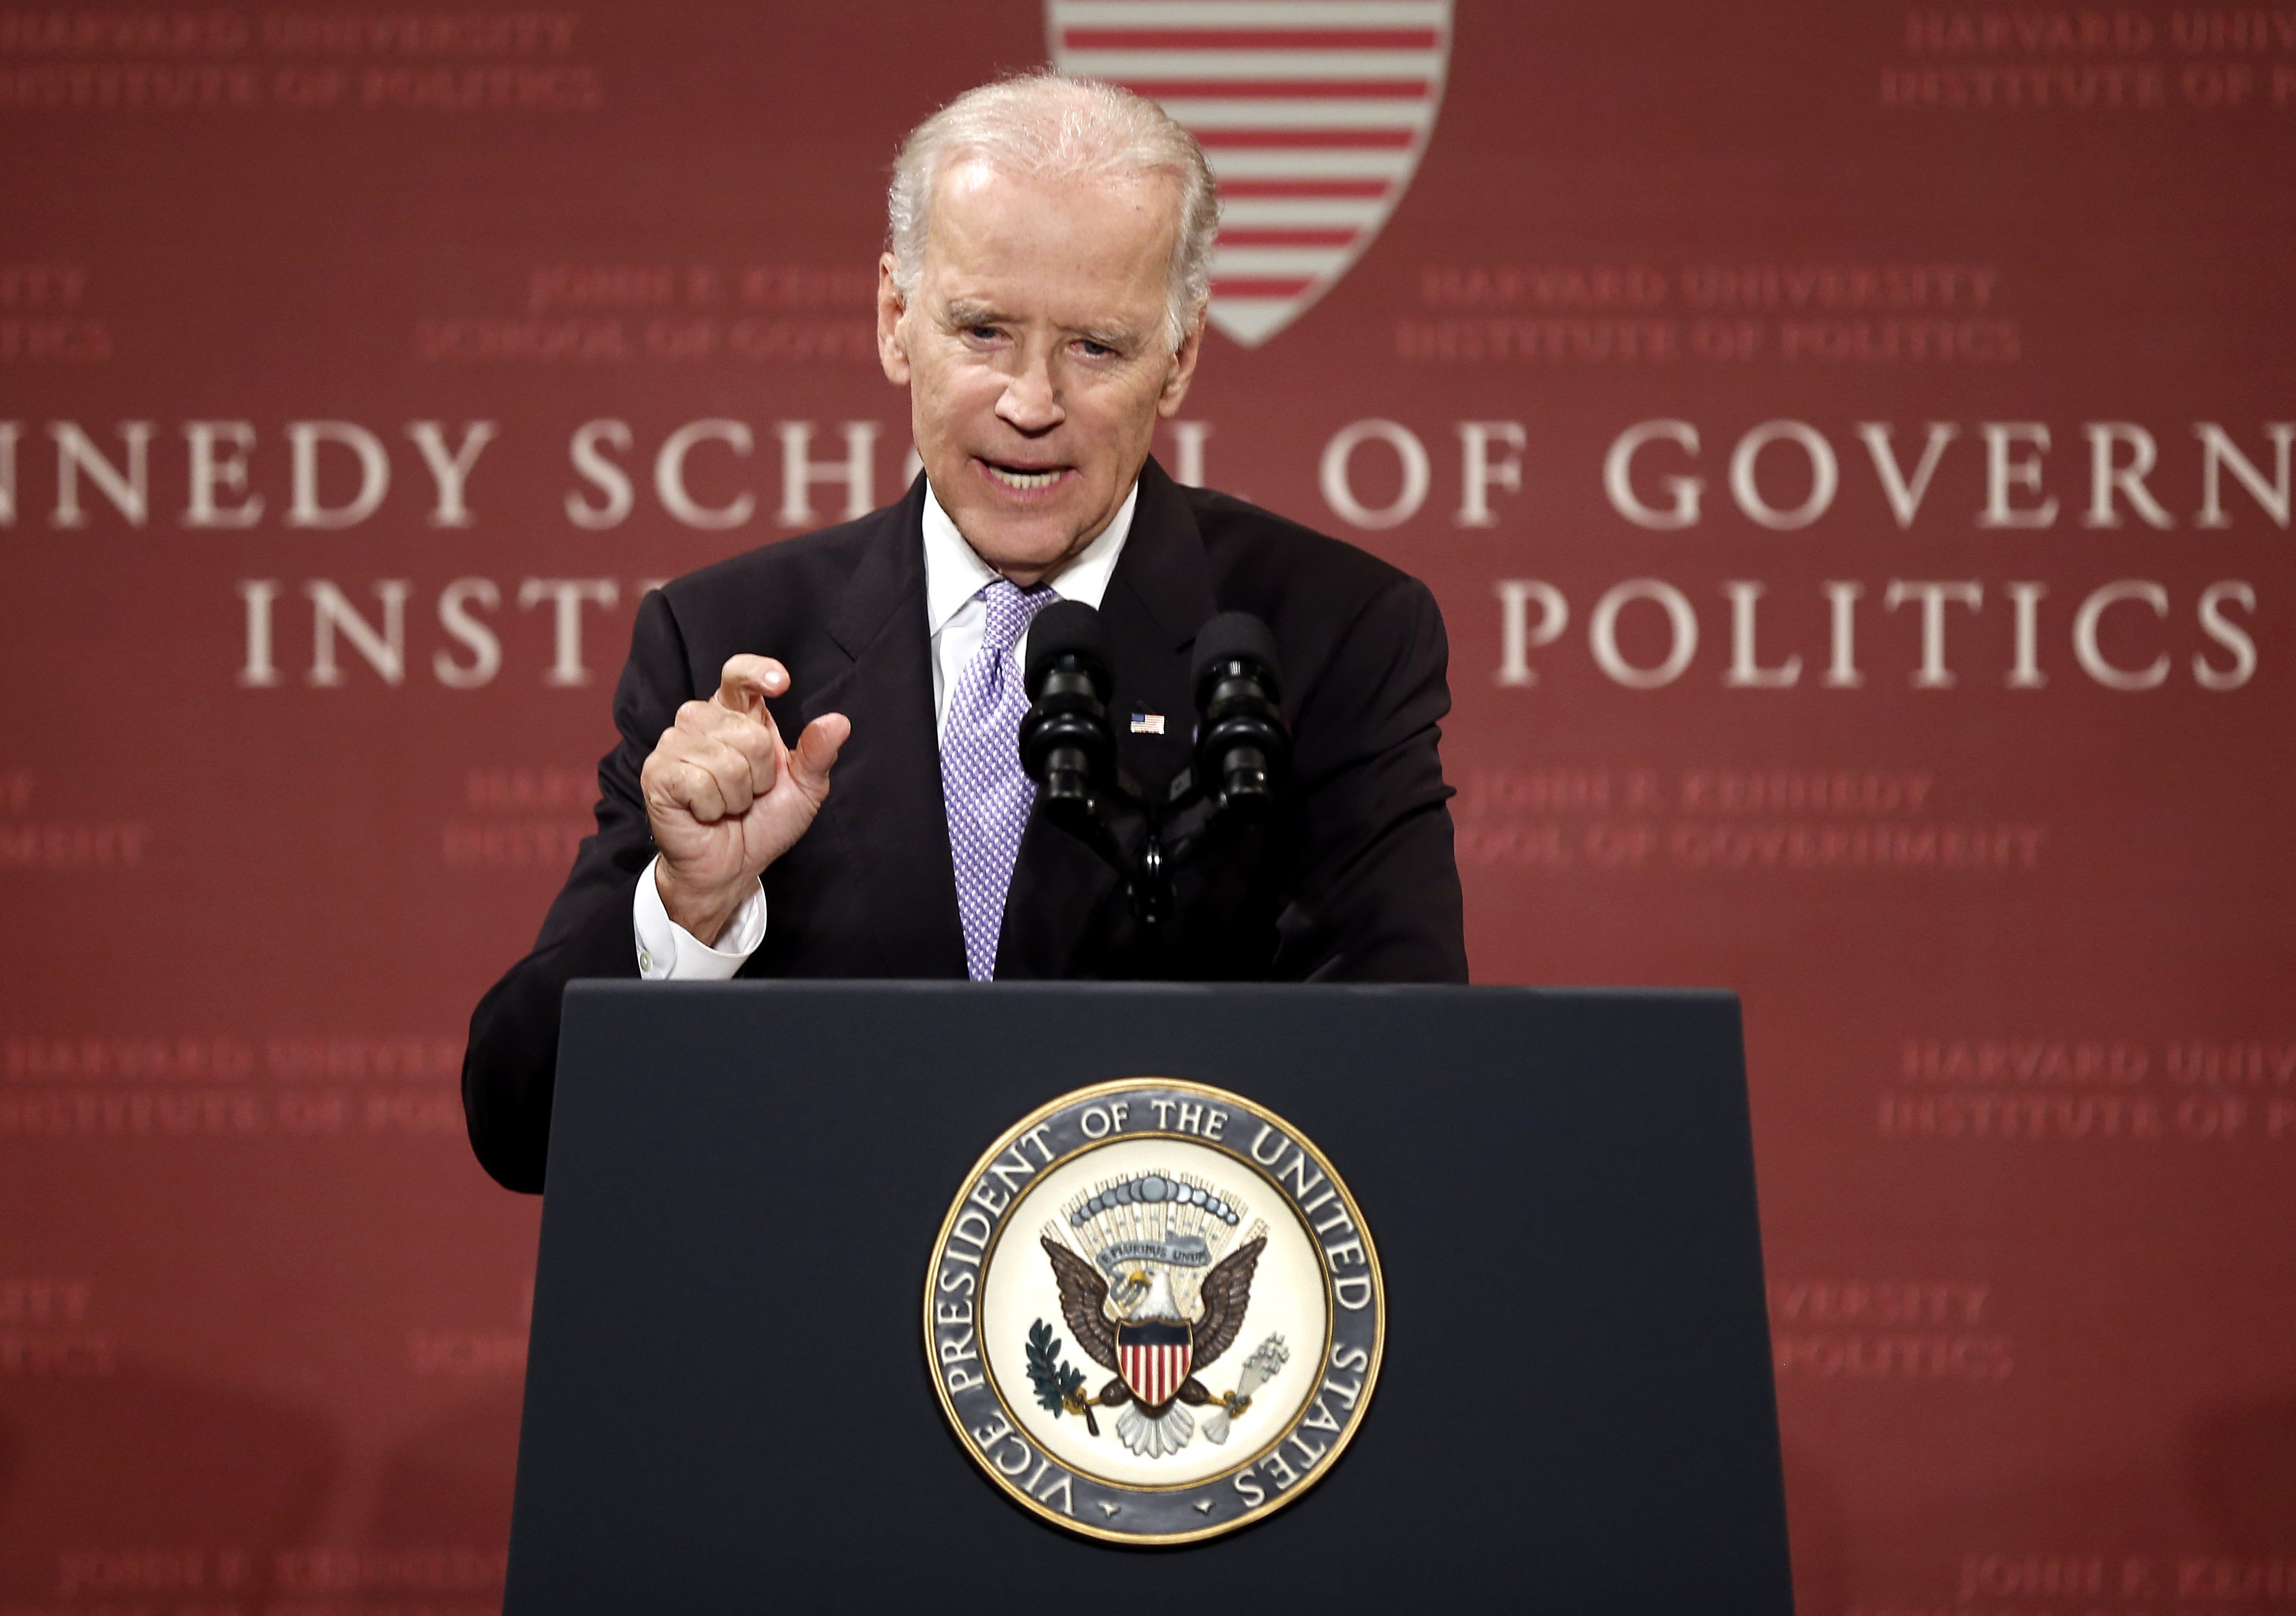 Vice President Joe Biden speaks to students faculty and staff at Harvard University's Kennedy School of Government in Cambridge, Mass. on Oct. 2, 2014.